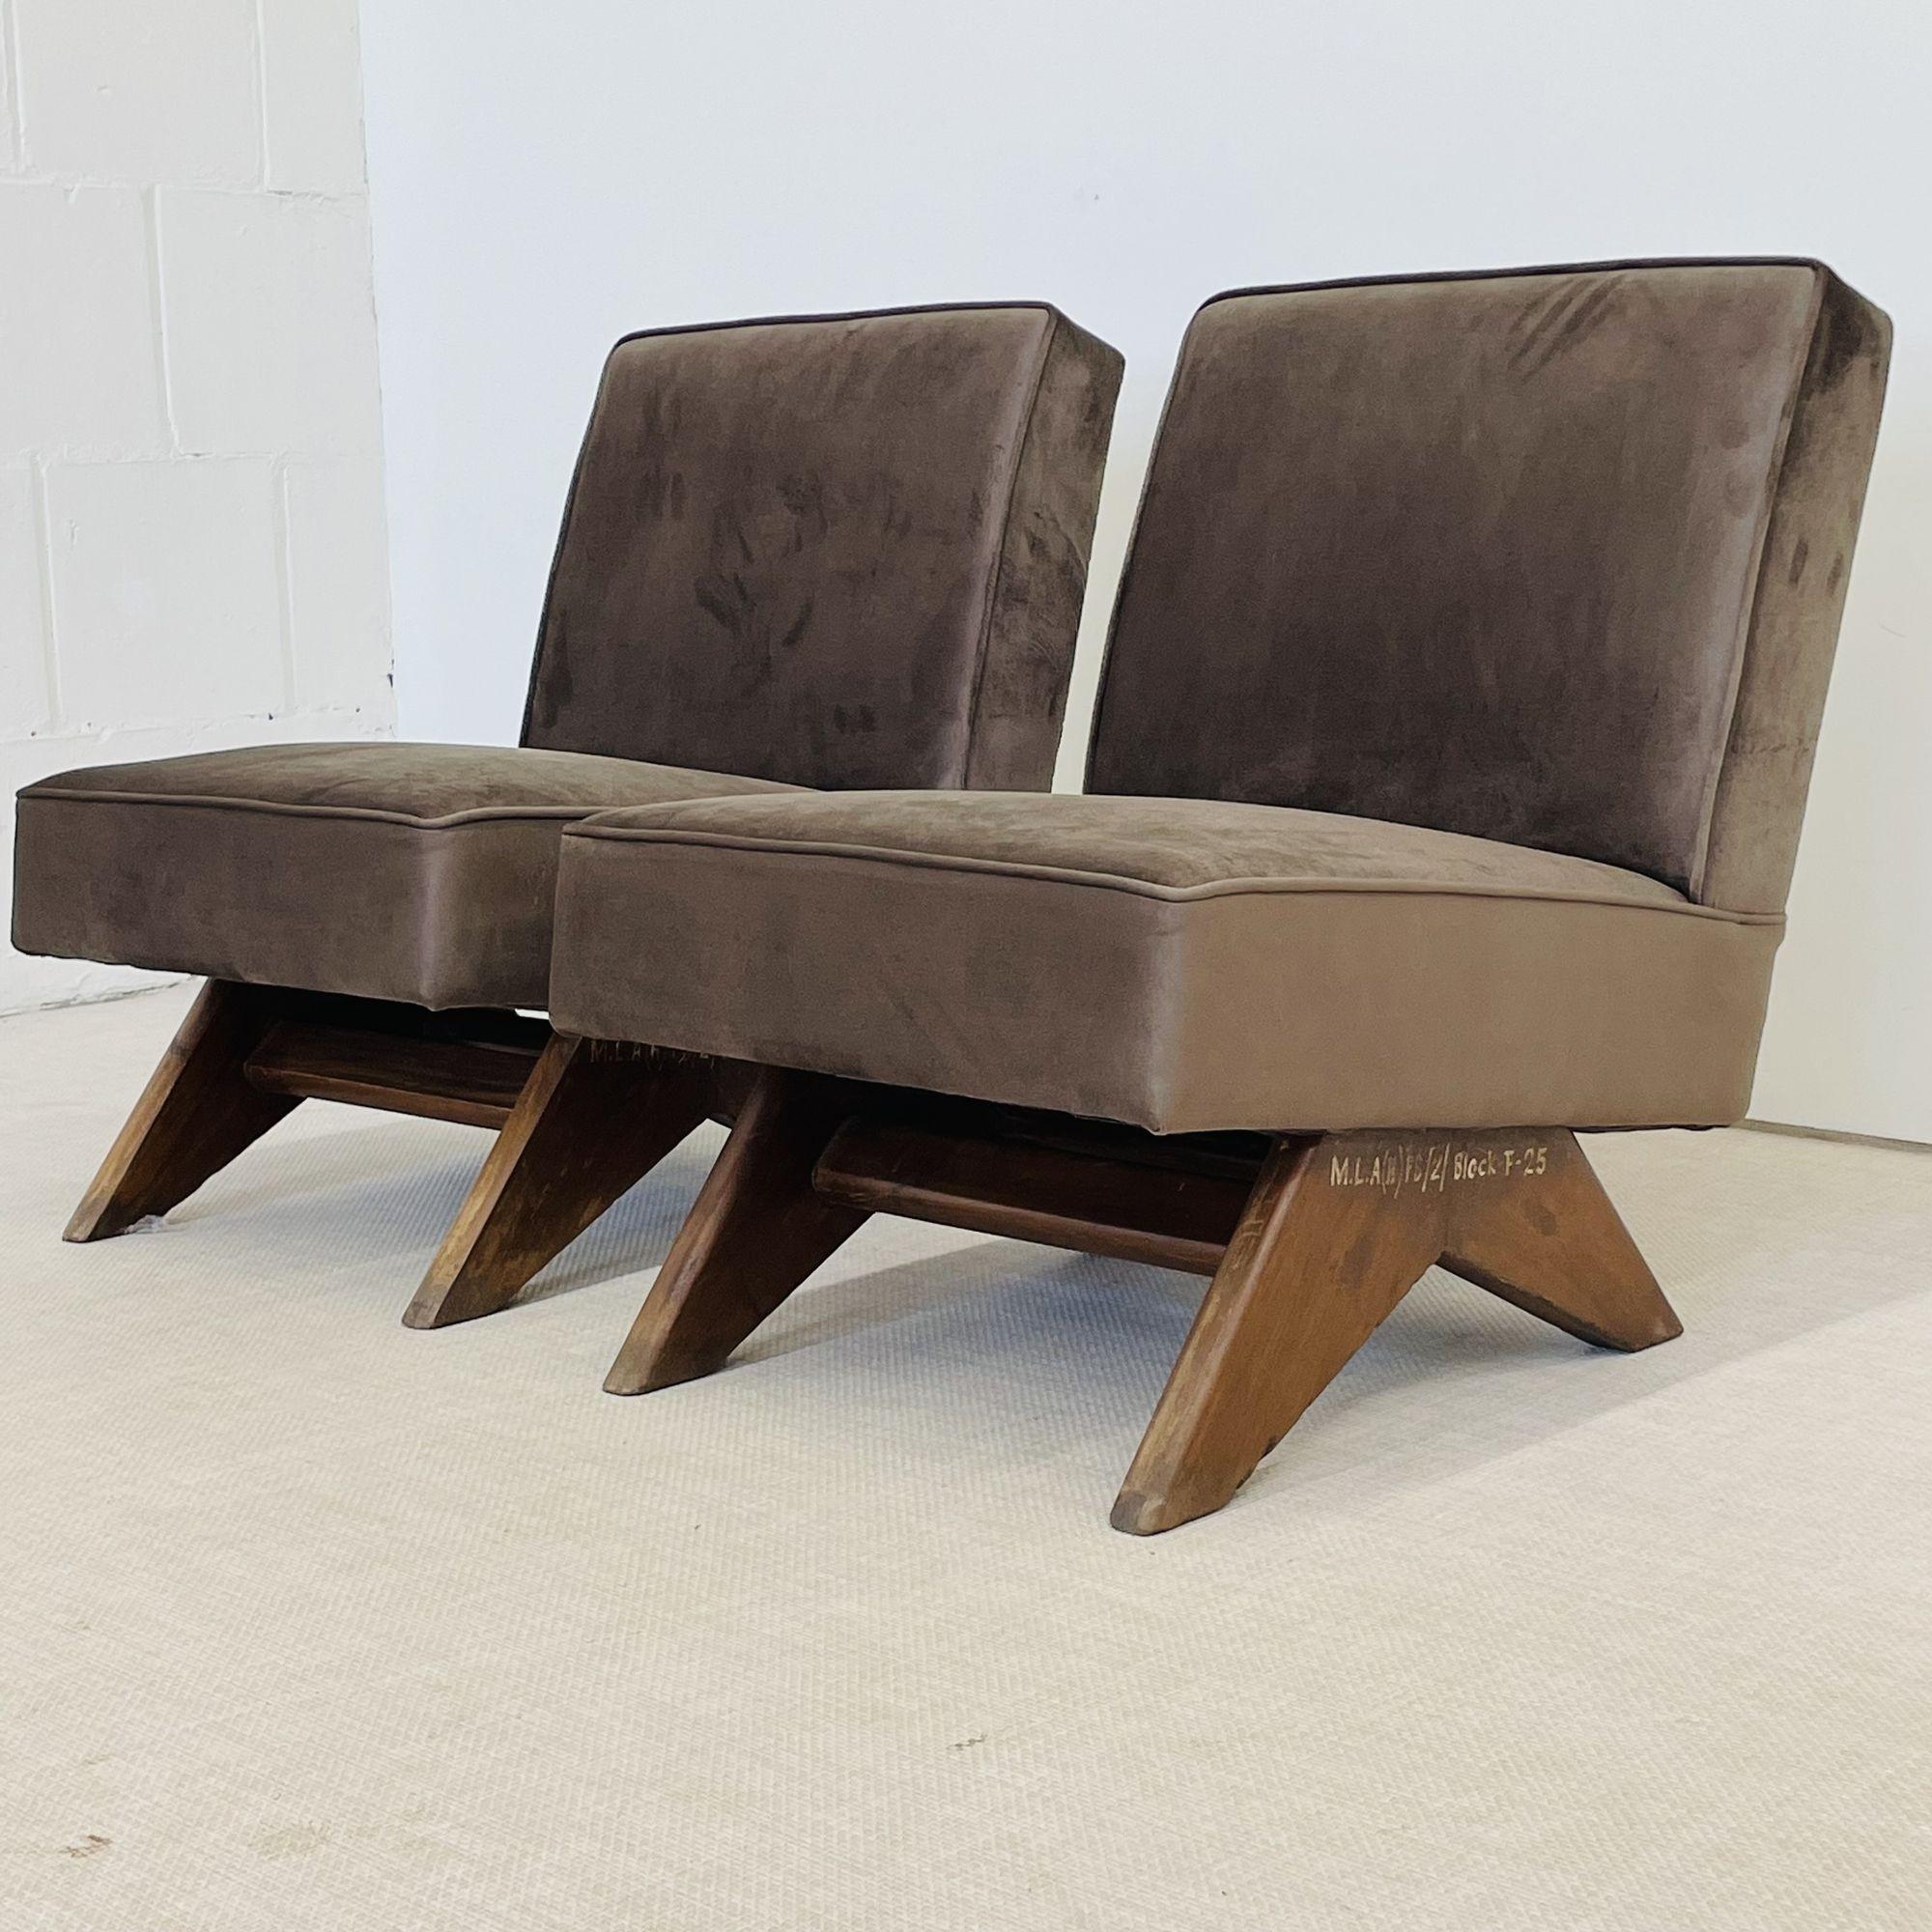 Pair of upholstered easy chairs, 'Fireside' chairs, Model PJ-SI-36-A attributed to Pierre Jeanneret
 
This chic pair of armless upholstered easy chairs feature a tilted backrest and seat on top of a low compass type leg assembly. 
 
France, India,